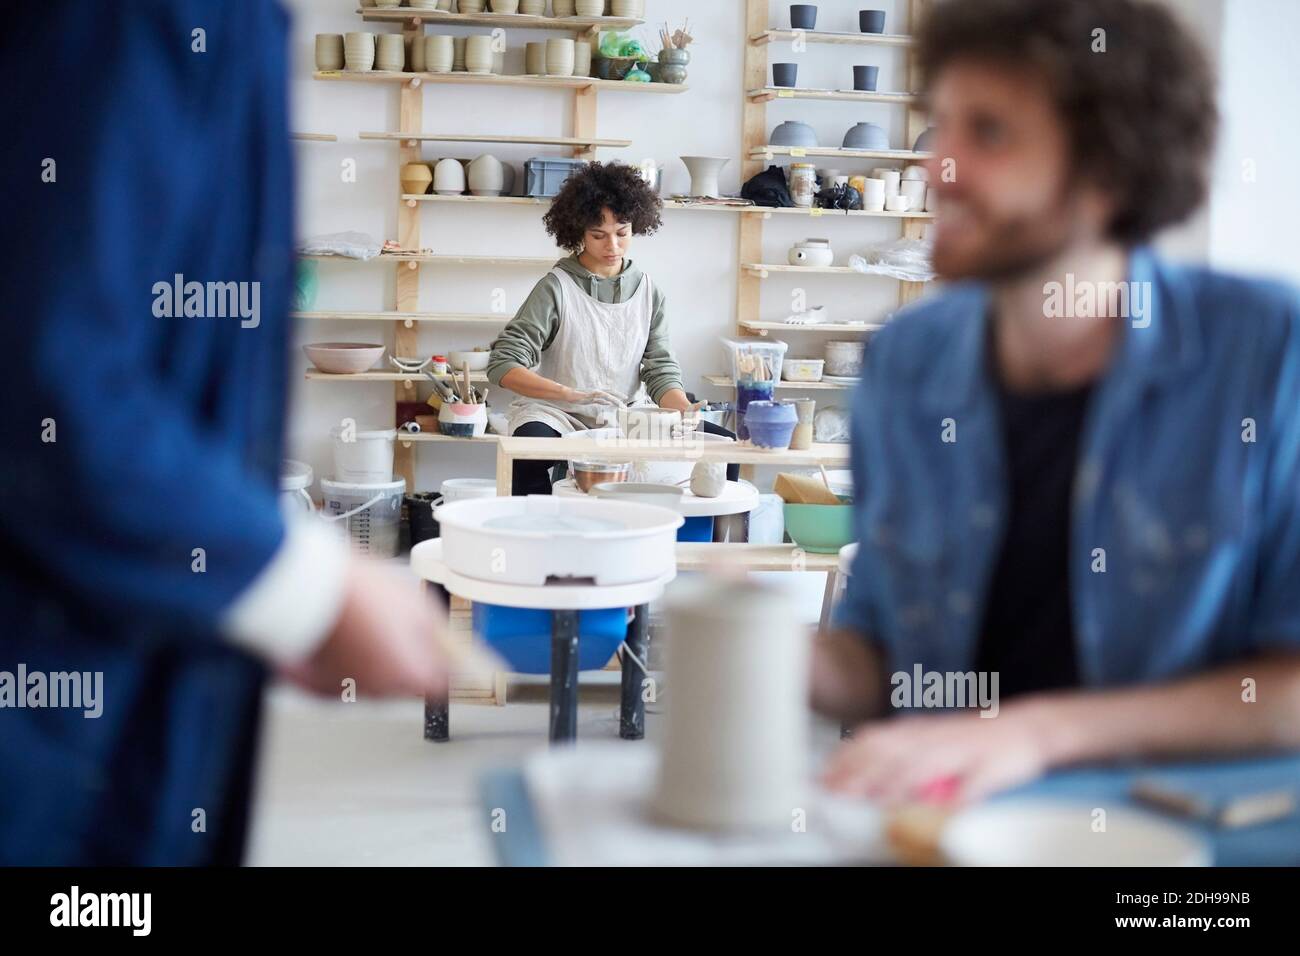 Woman molding clay in pottery class Stock Photo